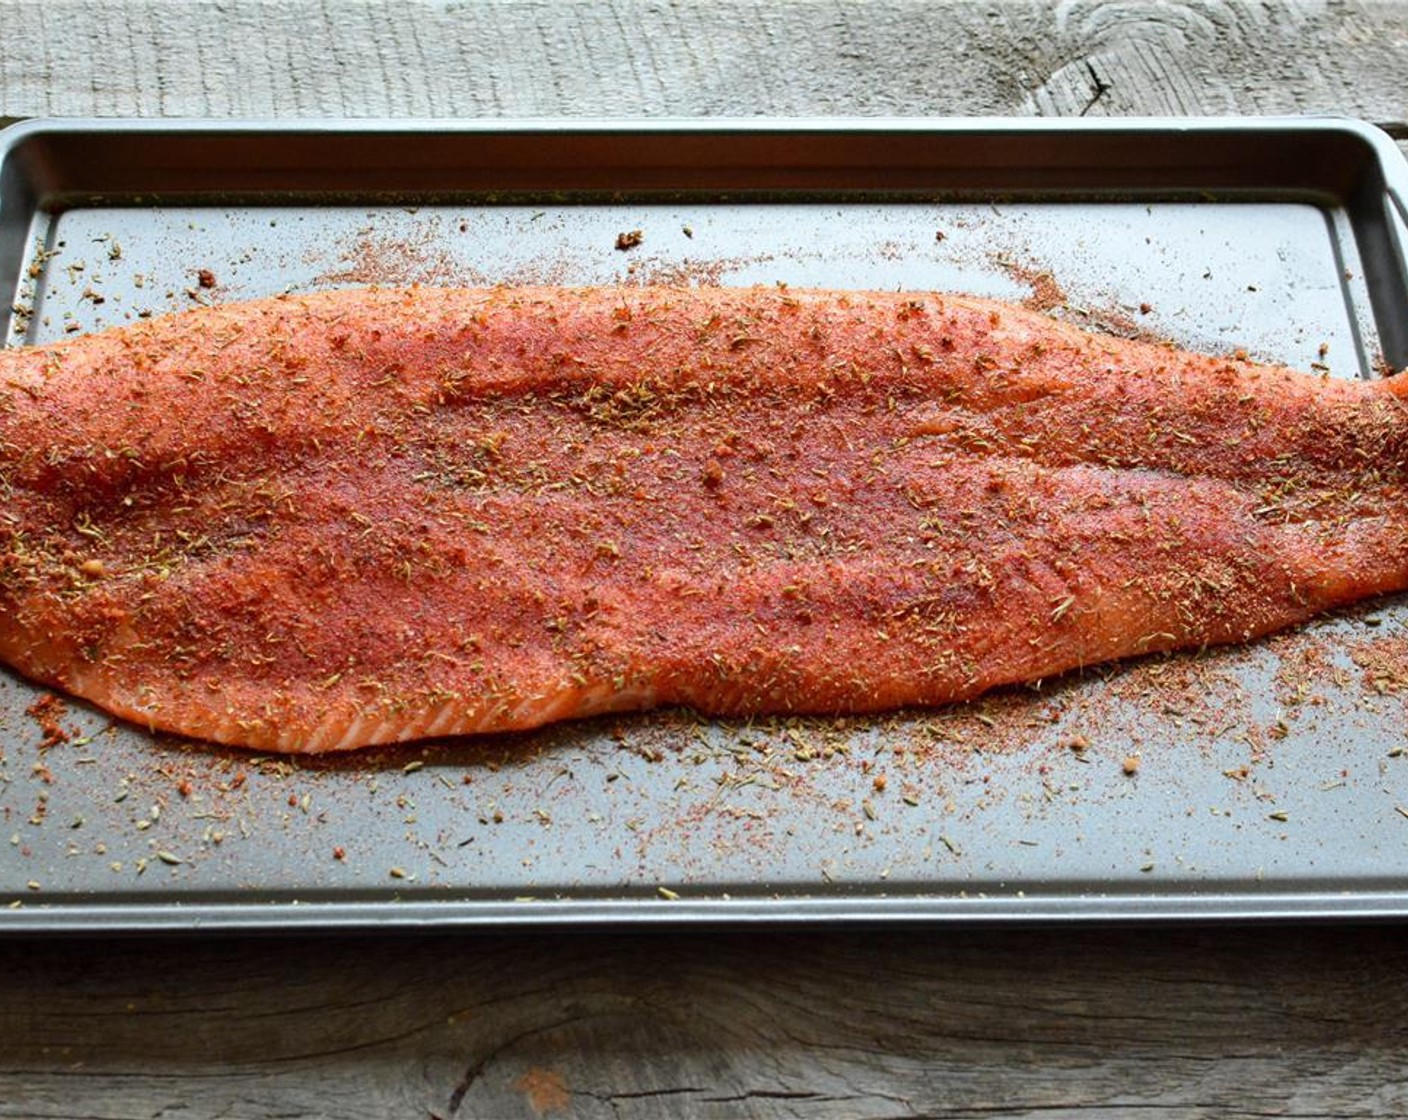 step 4 Generously sprinkle the blackened seasoning all over the salmon to coat it evenly. Repeat on the other side.